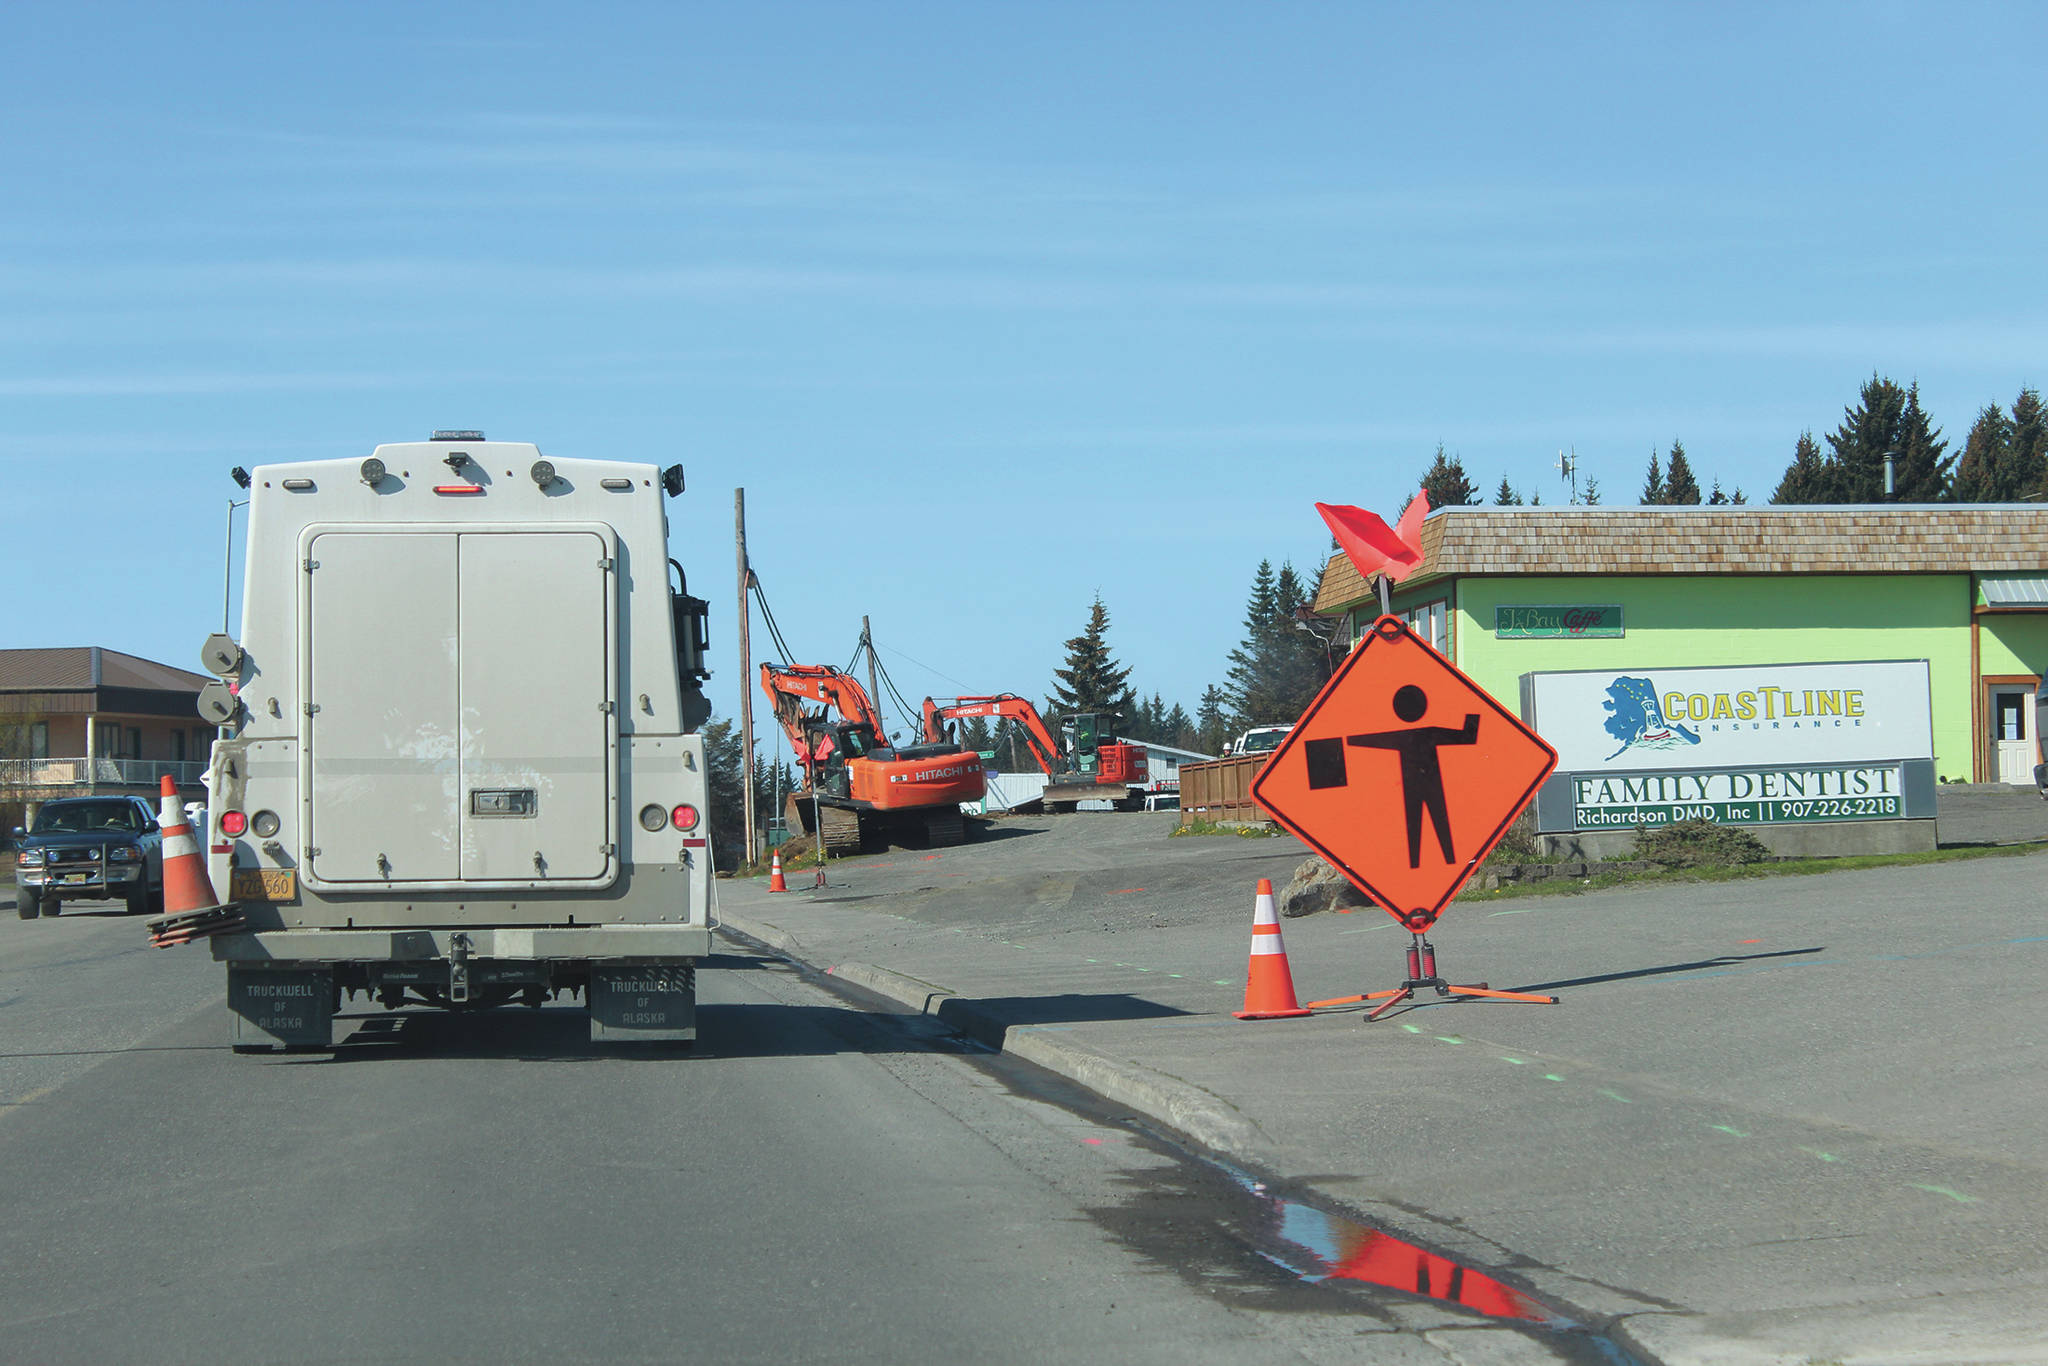 Vehicles make their way along Pioneer Avenue amid construction work Wednesday, May 13, 2020 in Homer, Alaska. (Photo by Megan Pacer/Homer News)